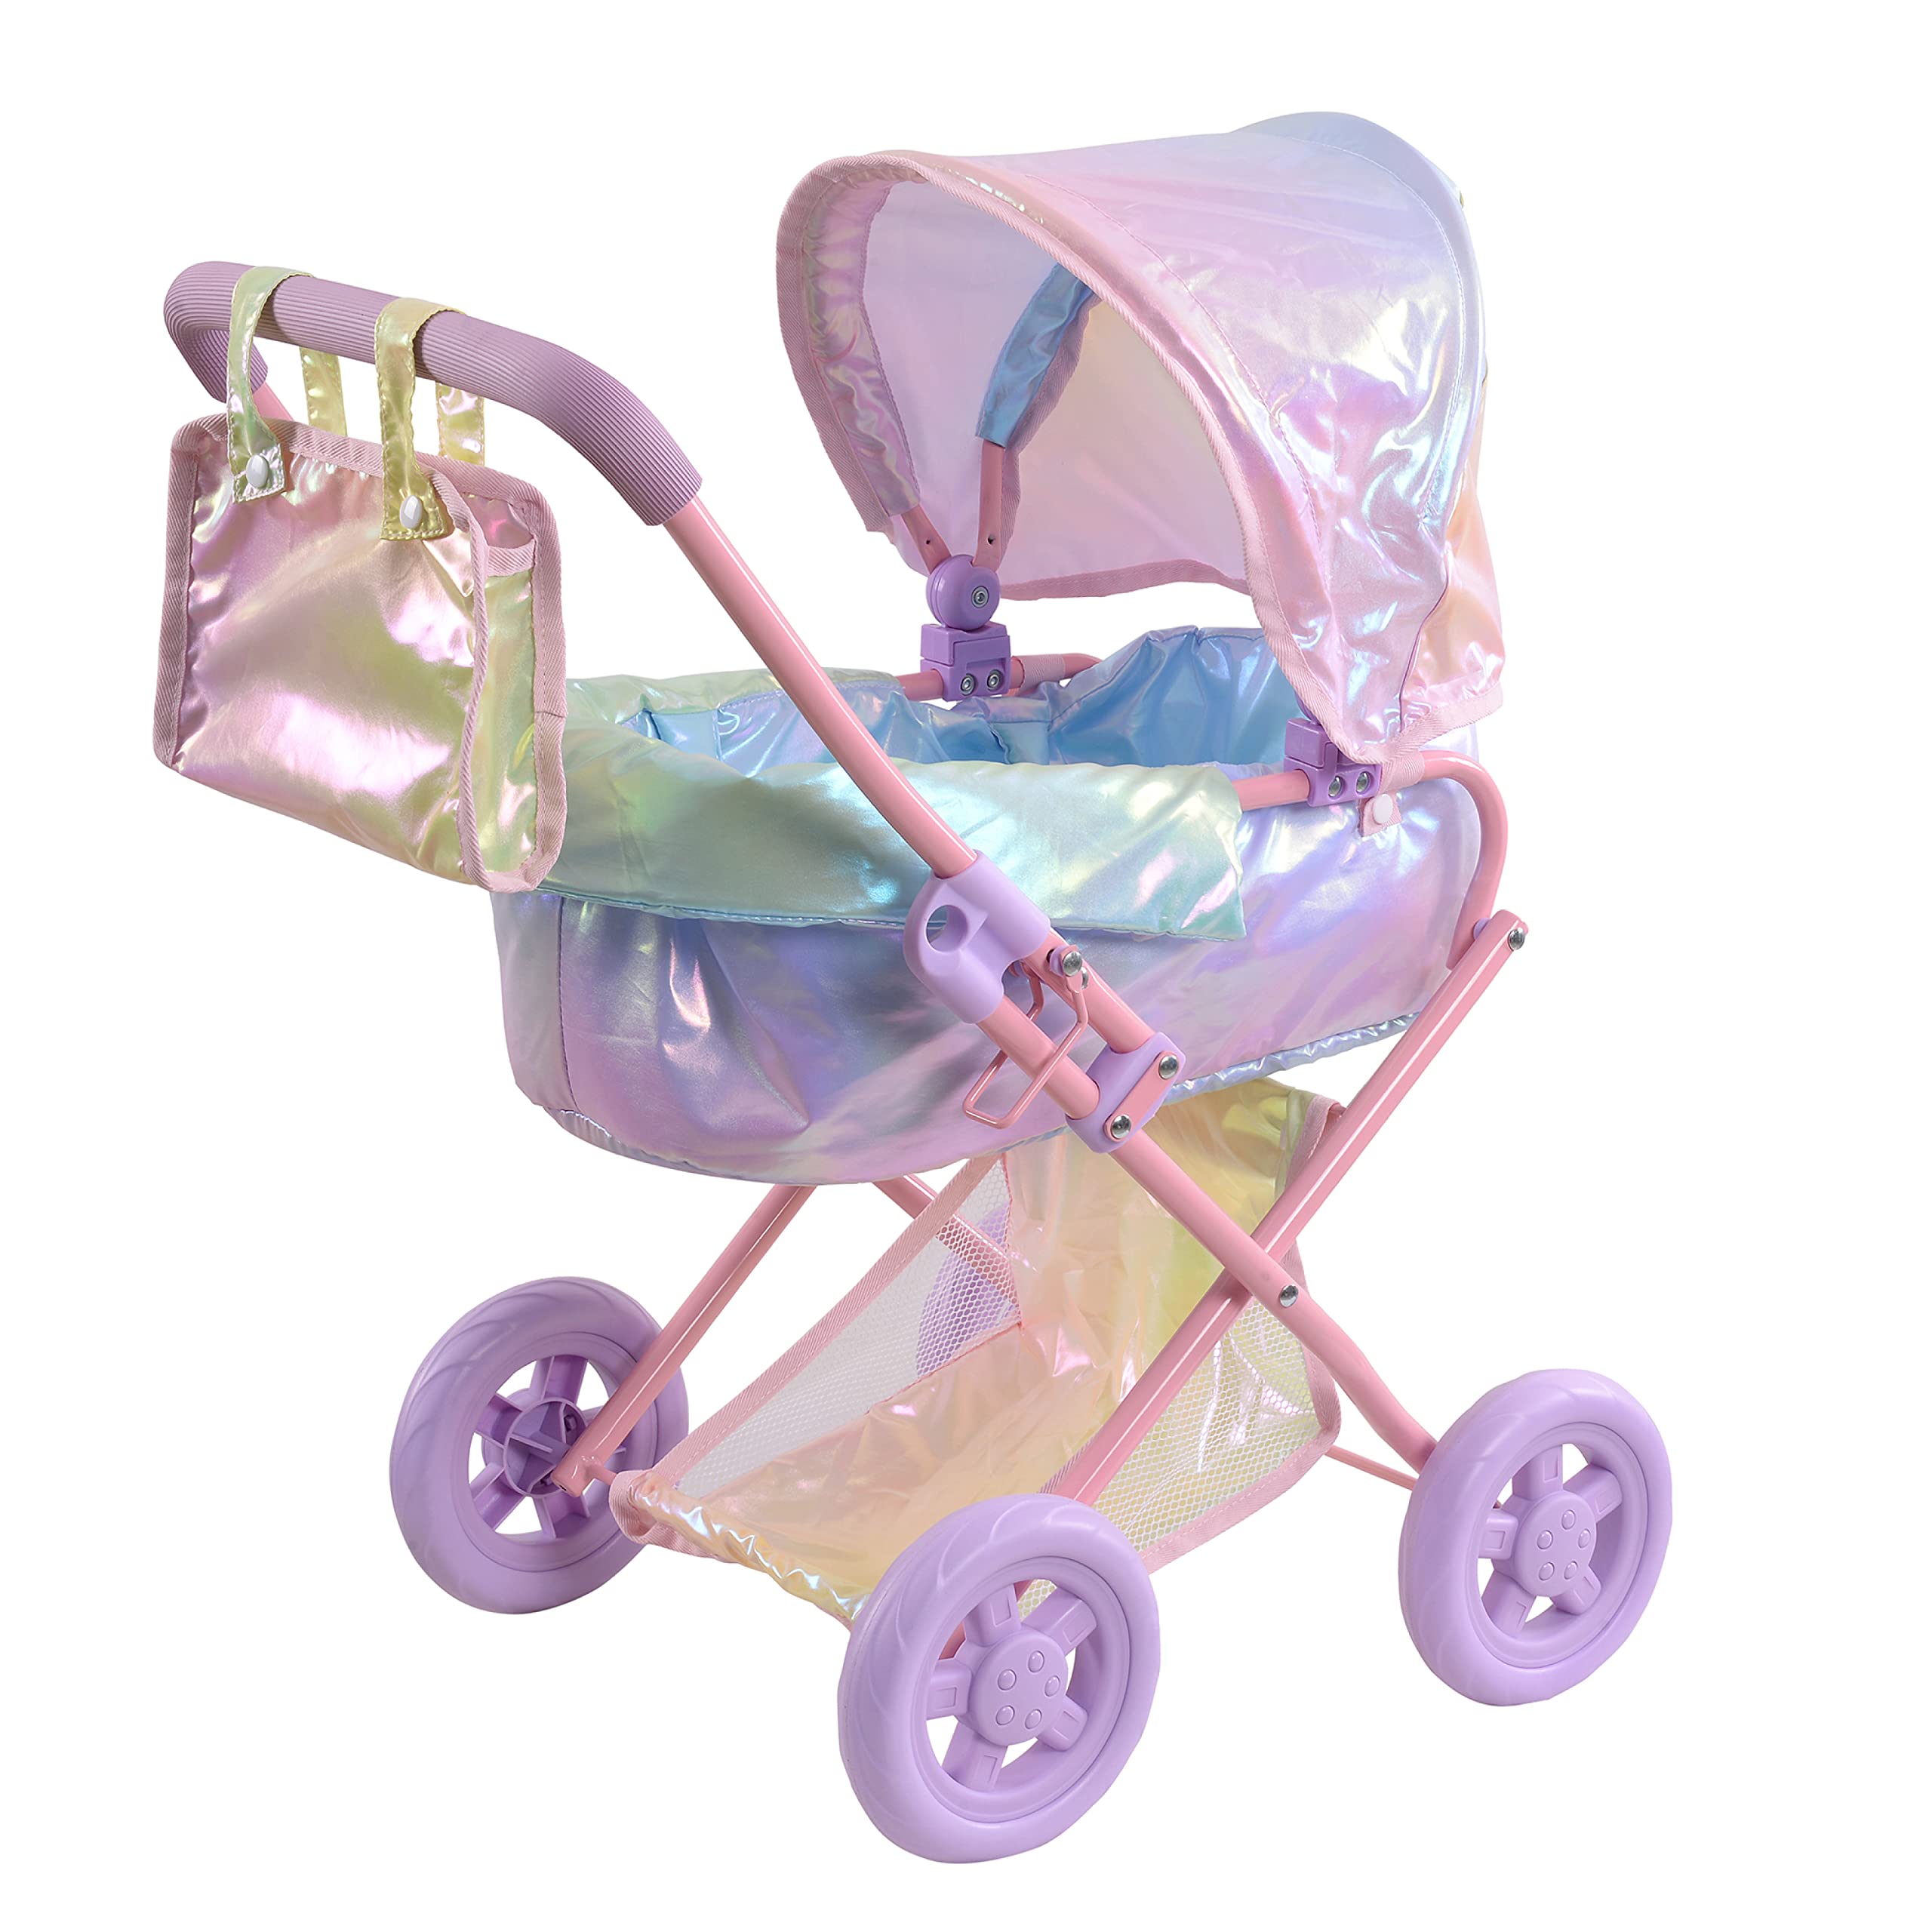 Olivia’s Little World - Baby Doll Bassinet Stroller, Baby Doll Pram Stroller Buggy for 3 Year Old Girls Toddlers, 2 in 1 Deluxe Doll Stroller for up to 16